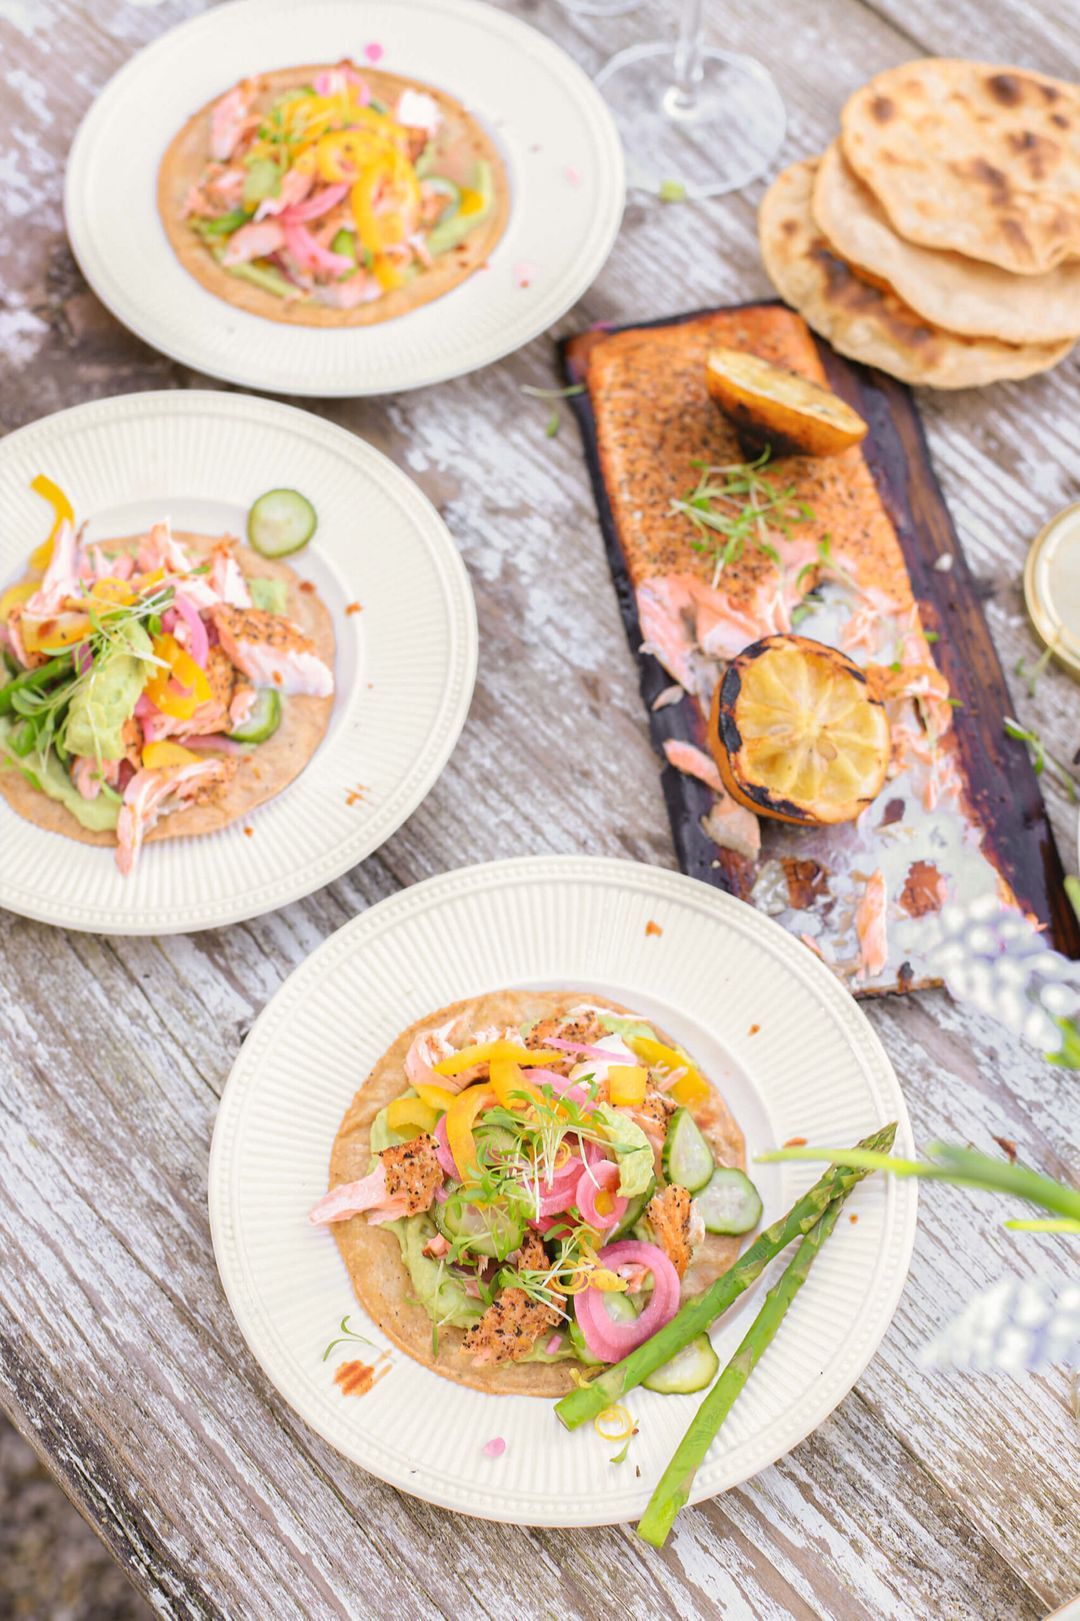 Salmon tacos from the BBQ avocado and roasted lemon